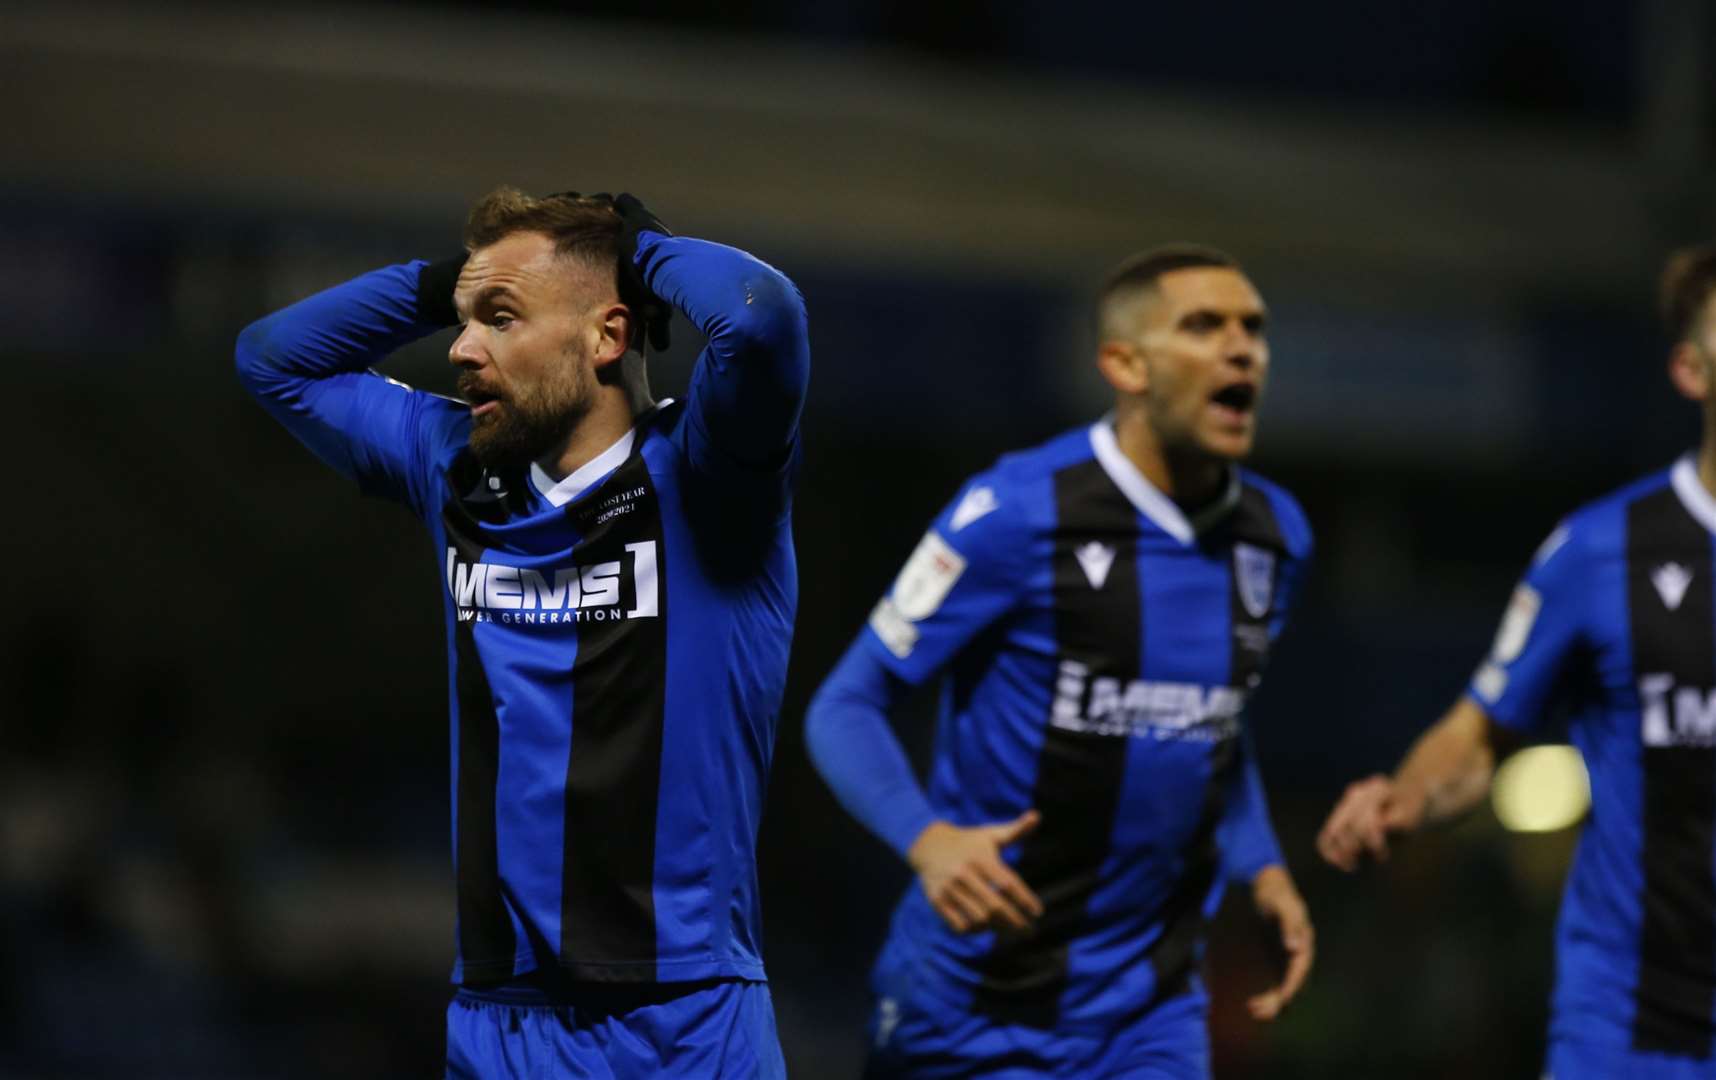 Gillingham lost to Portsmouth after conceding in the 93rd minute. Danny Lloyd had several chances to score in the match Picture: Andy Jones